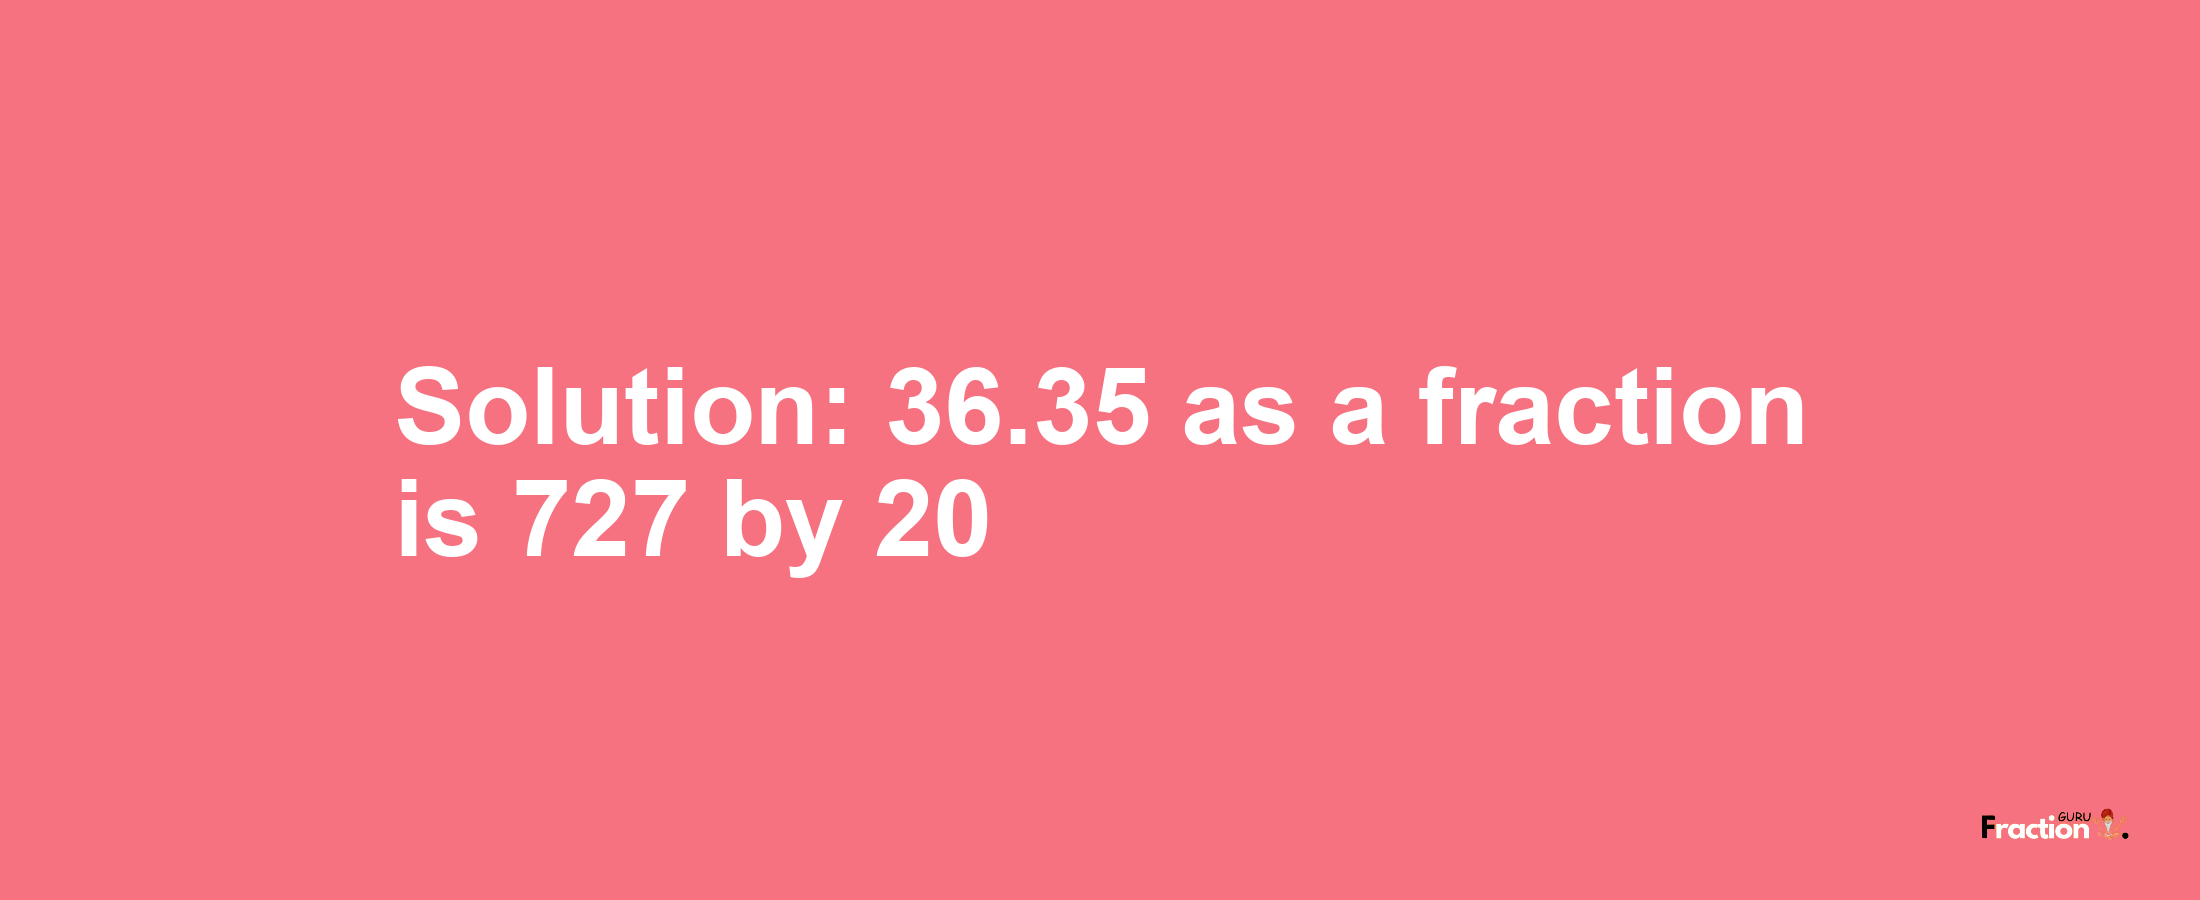 Solution:36.35 as a fraction is 727/20